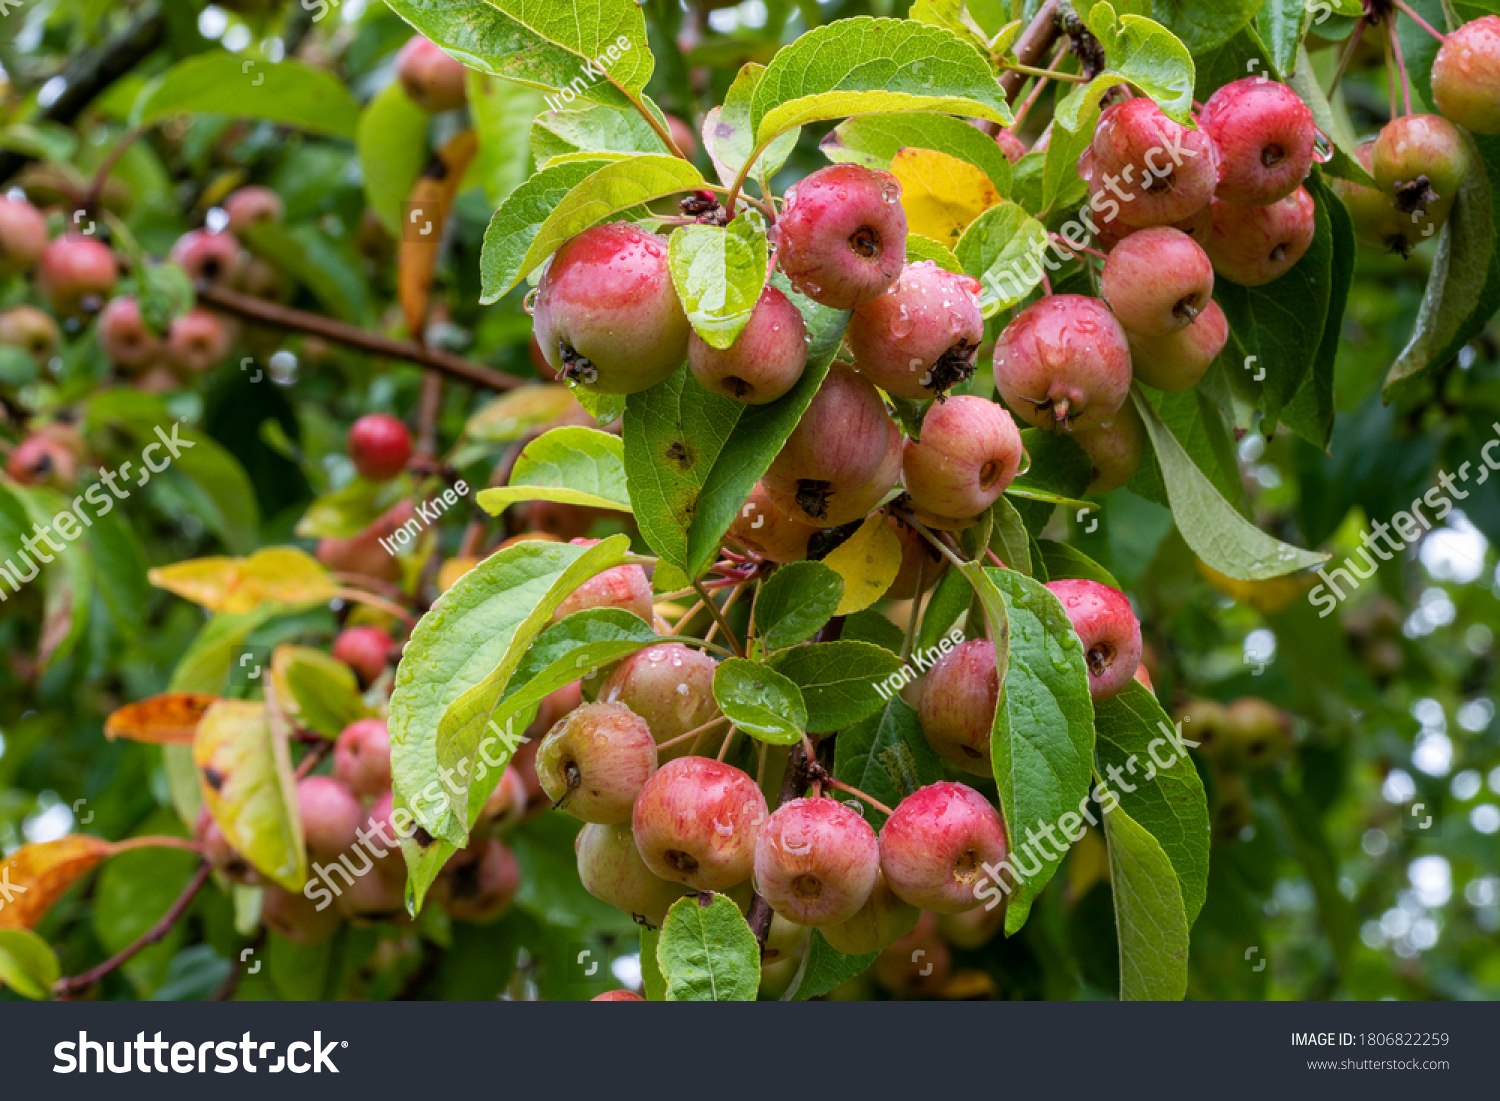 Close up of red crab apples, Malus 'Evereste', amongst green leaves, wet with rain on tree branch. Fruits and green leaves blurred in the background. #1806822259